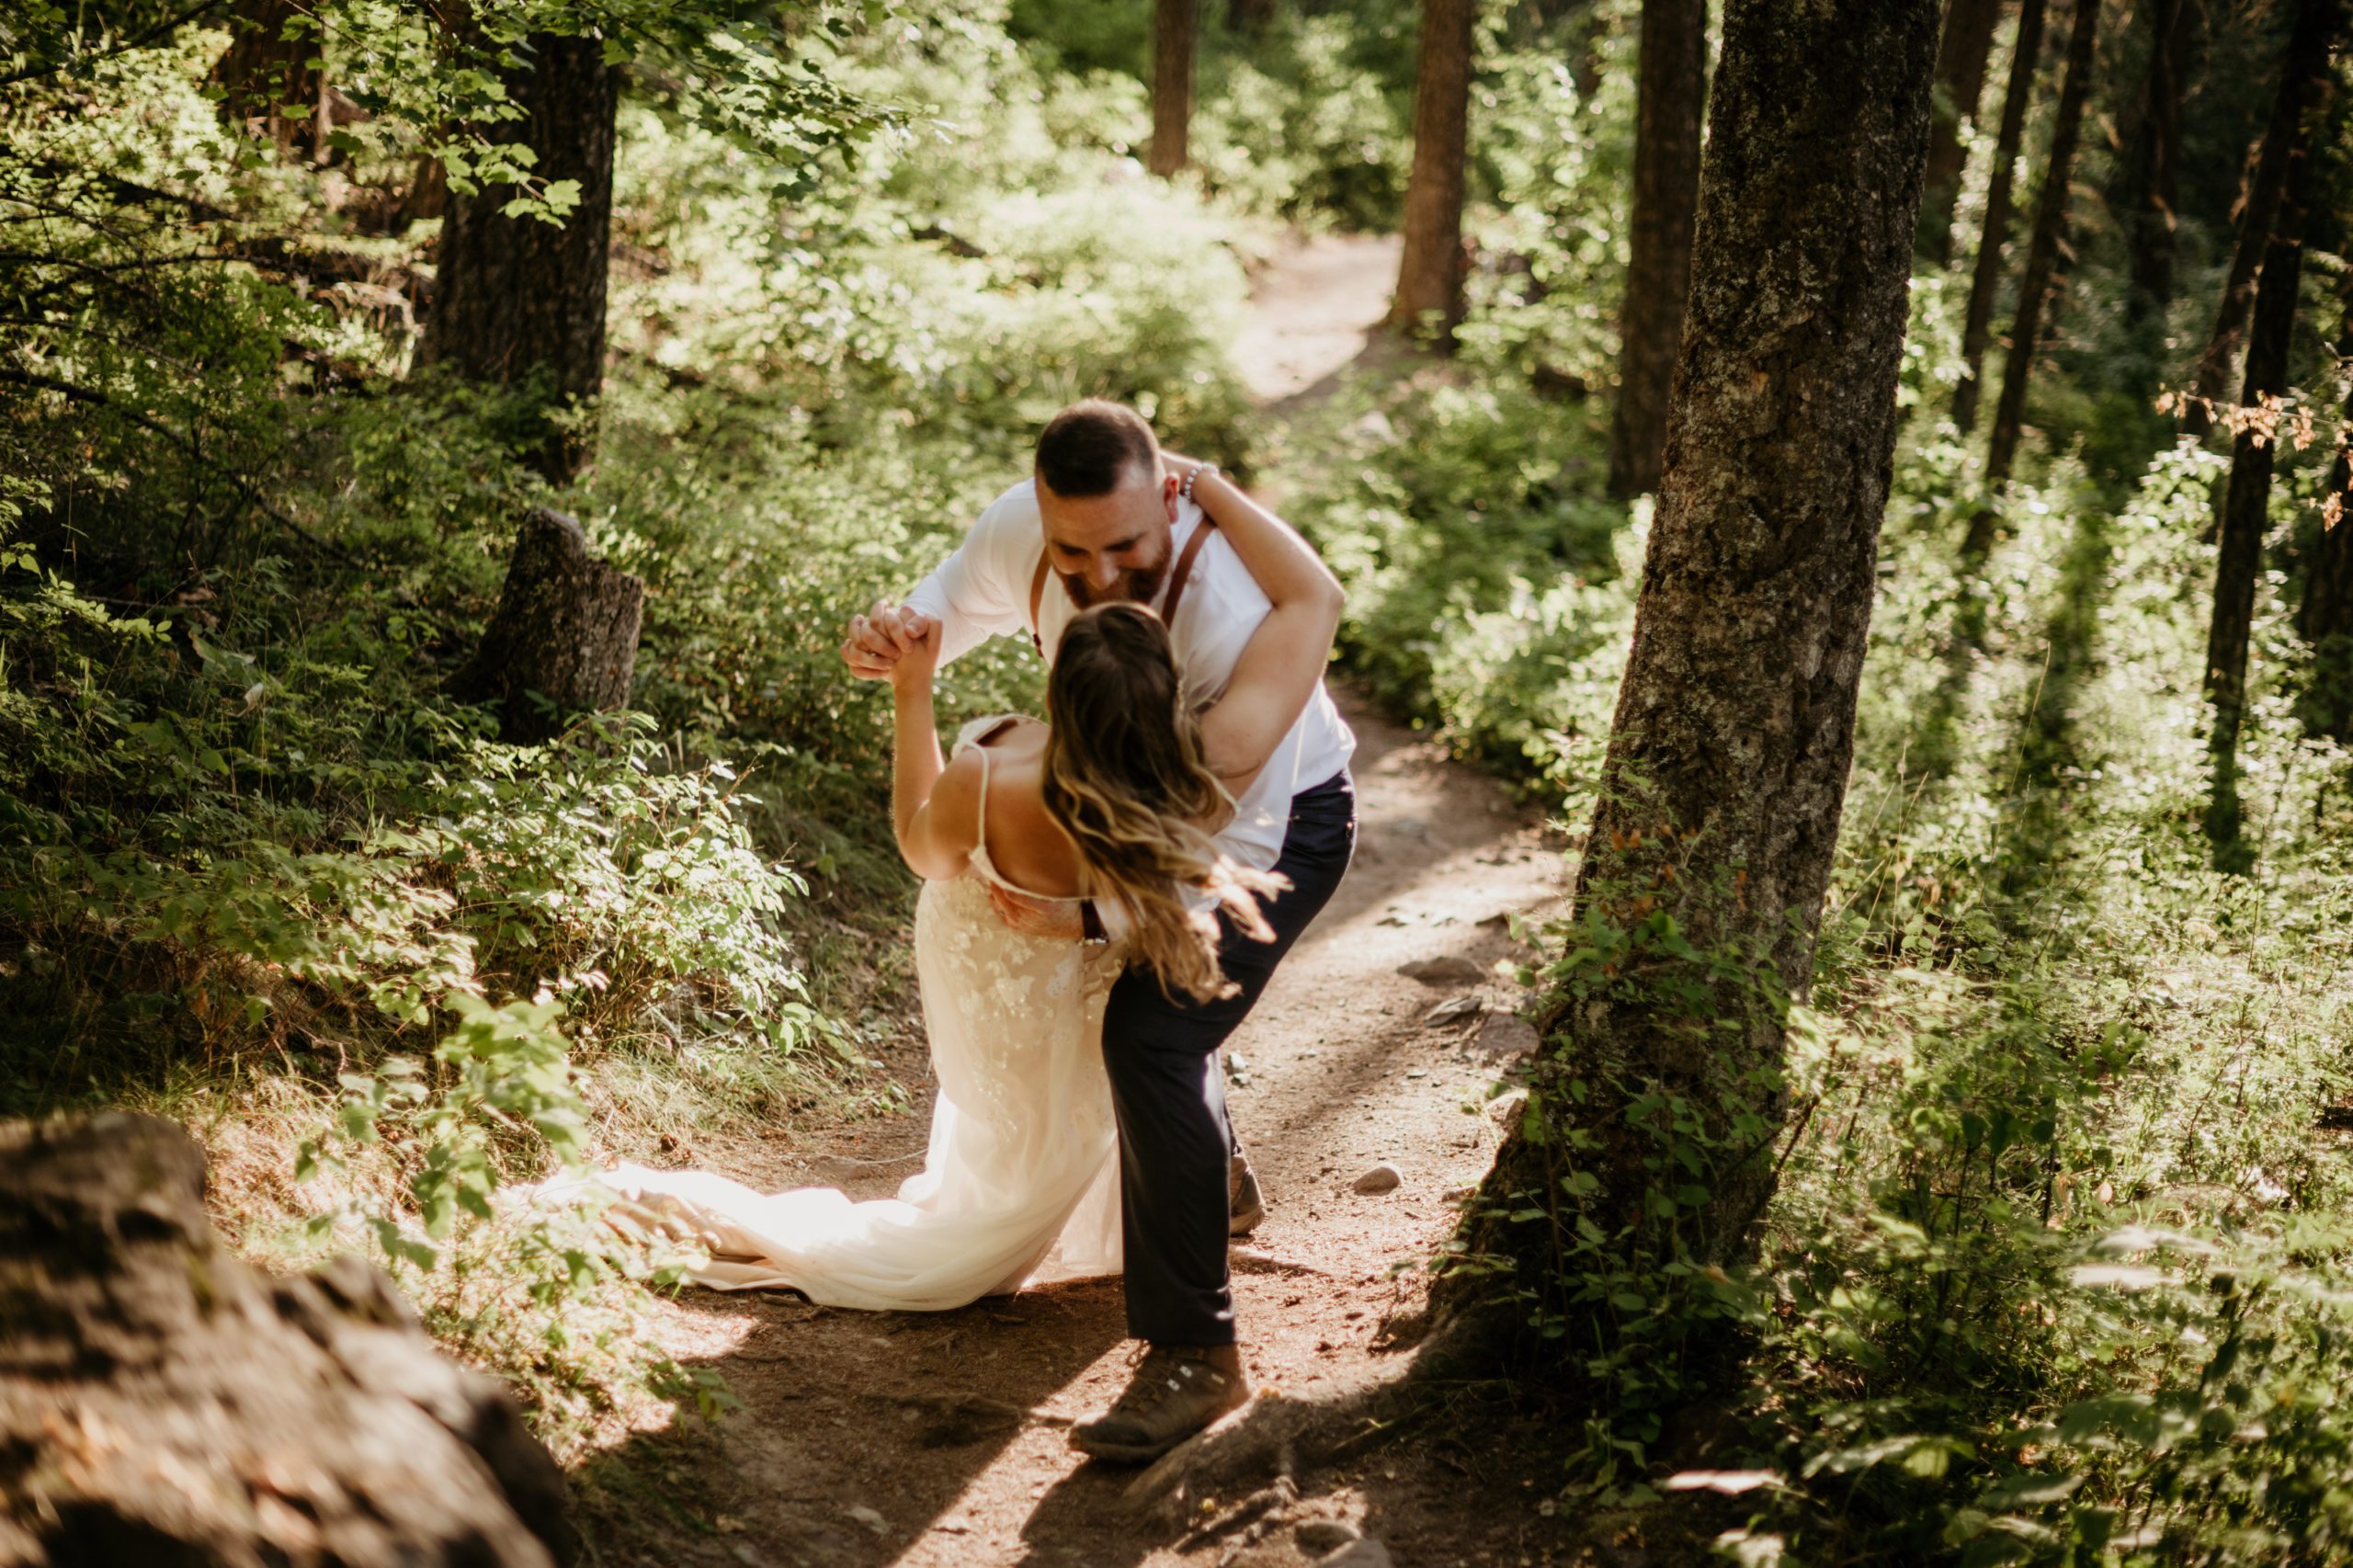 An adventure wedding Holland Lake Falls hiking elopement is the perfect Montana elopement! A great alternative to busy Glacier National Park!